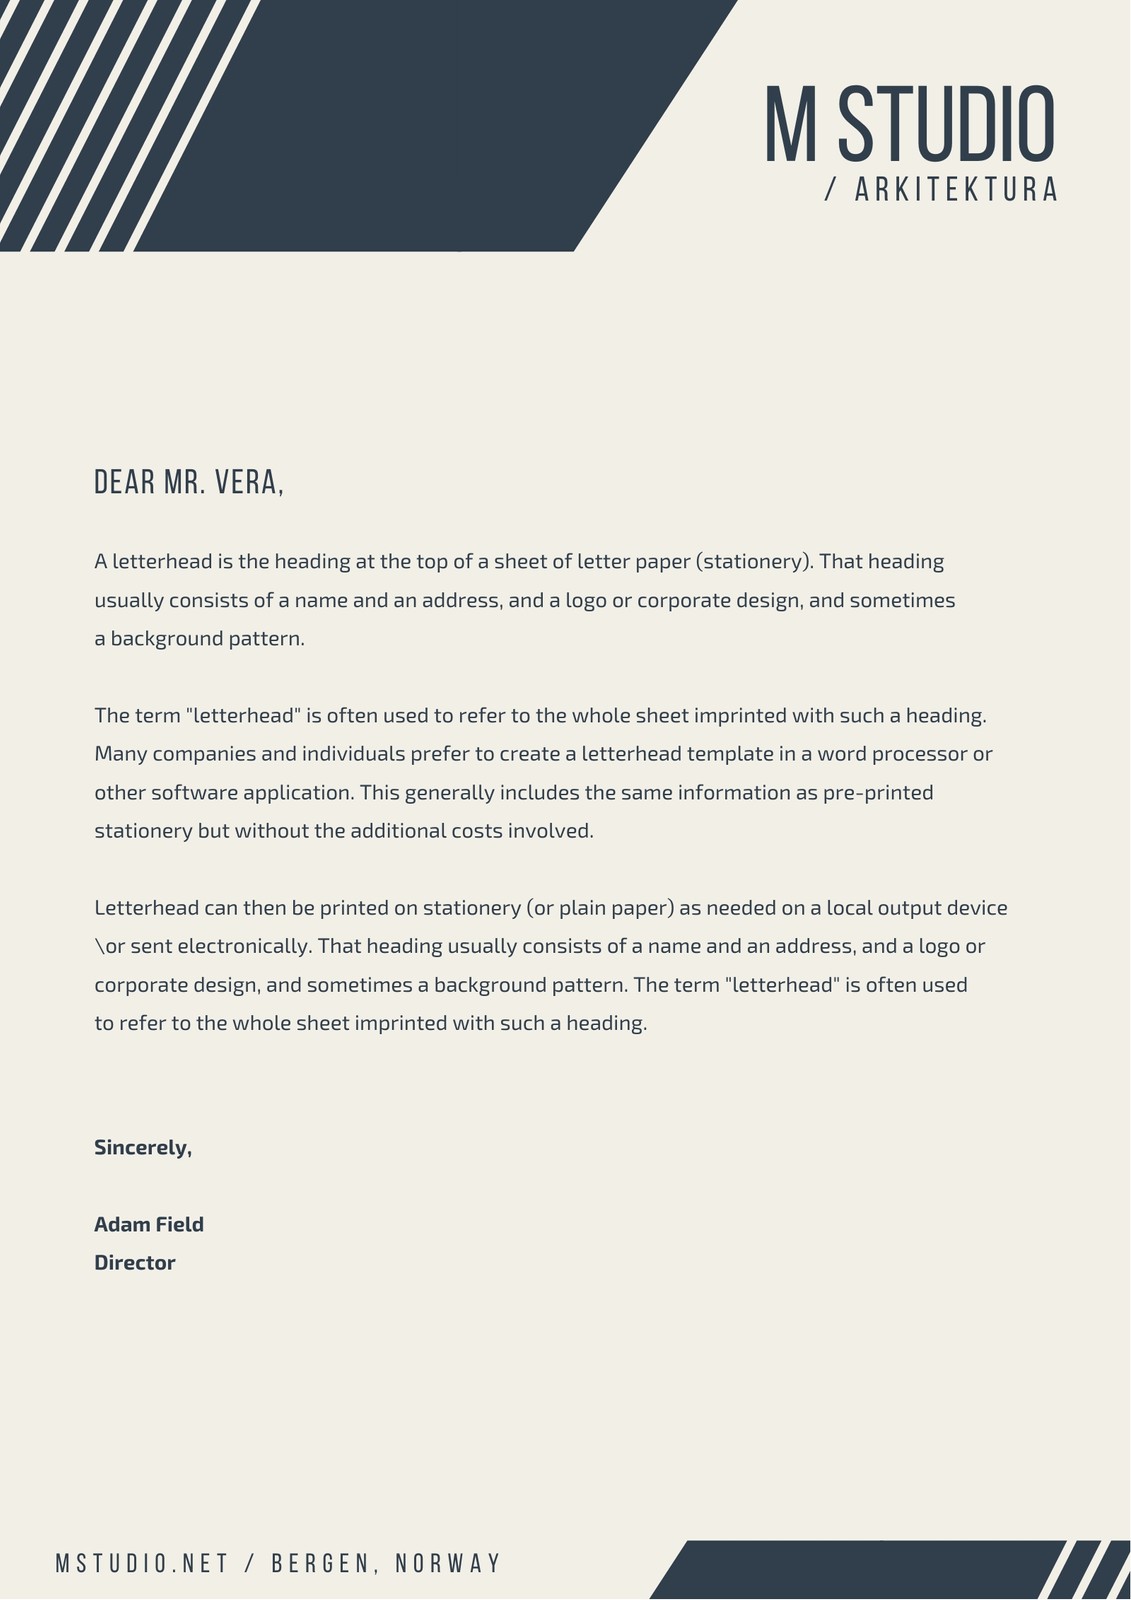 Free, printable business letterhead templates to customize  Canva Inside Free Online Business Letterhead Templates